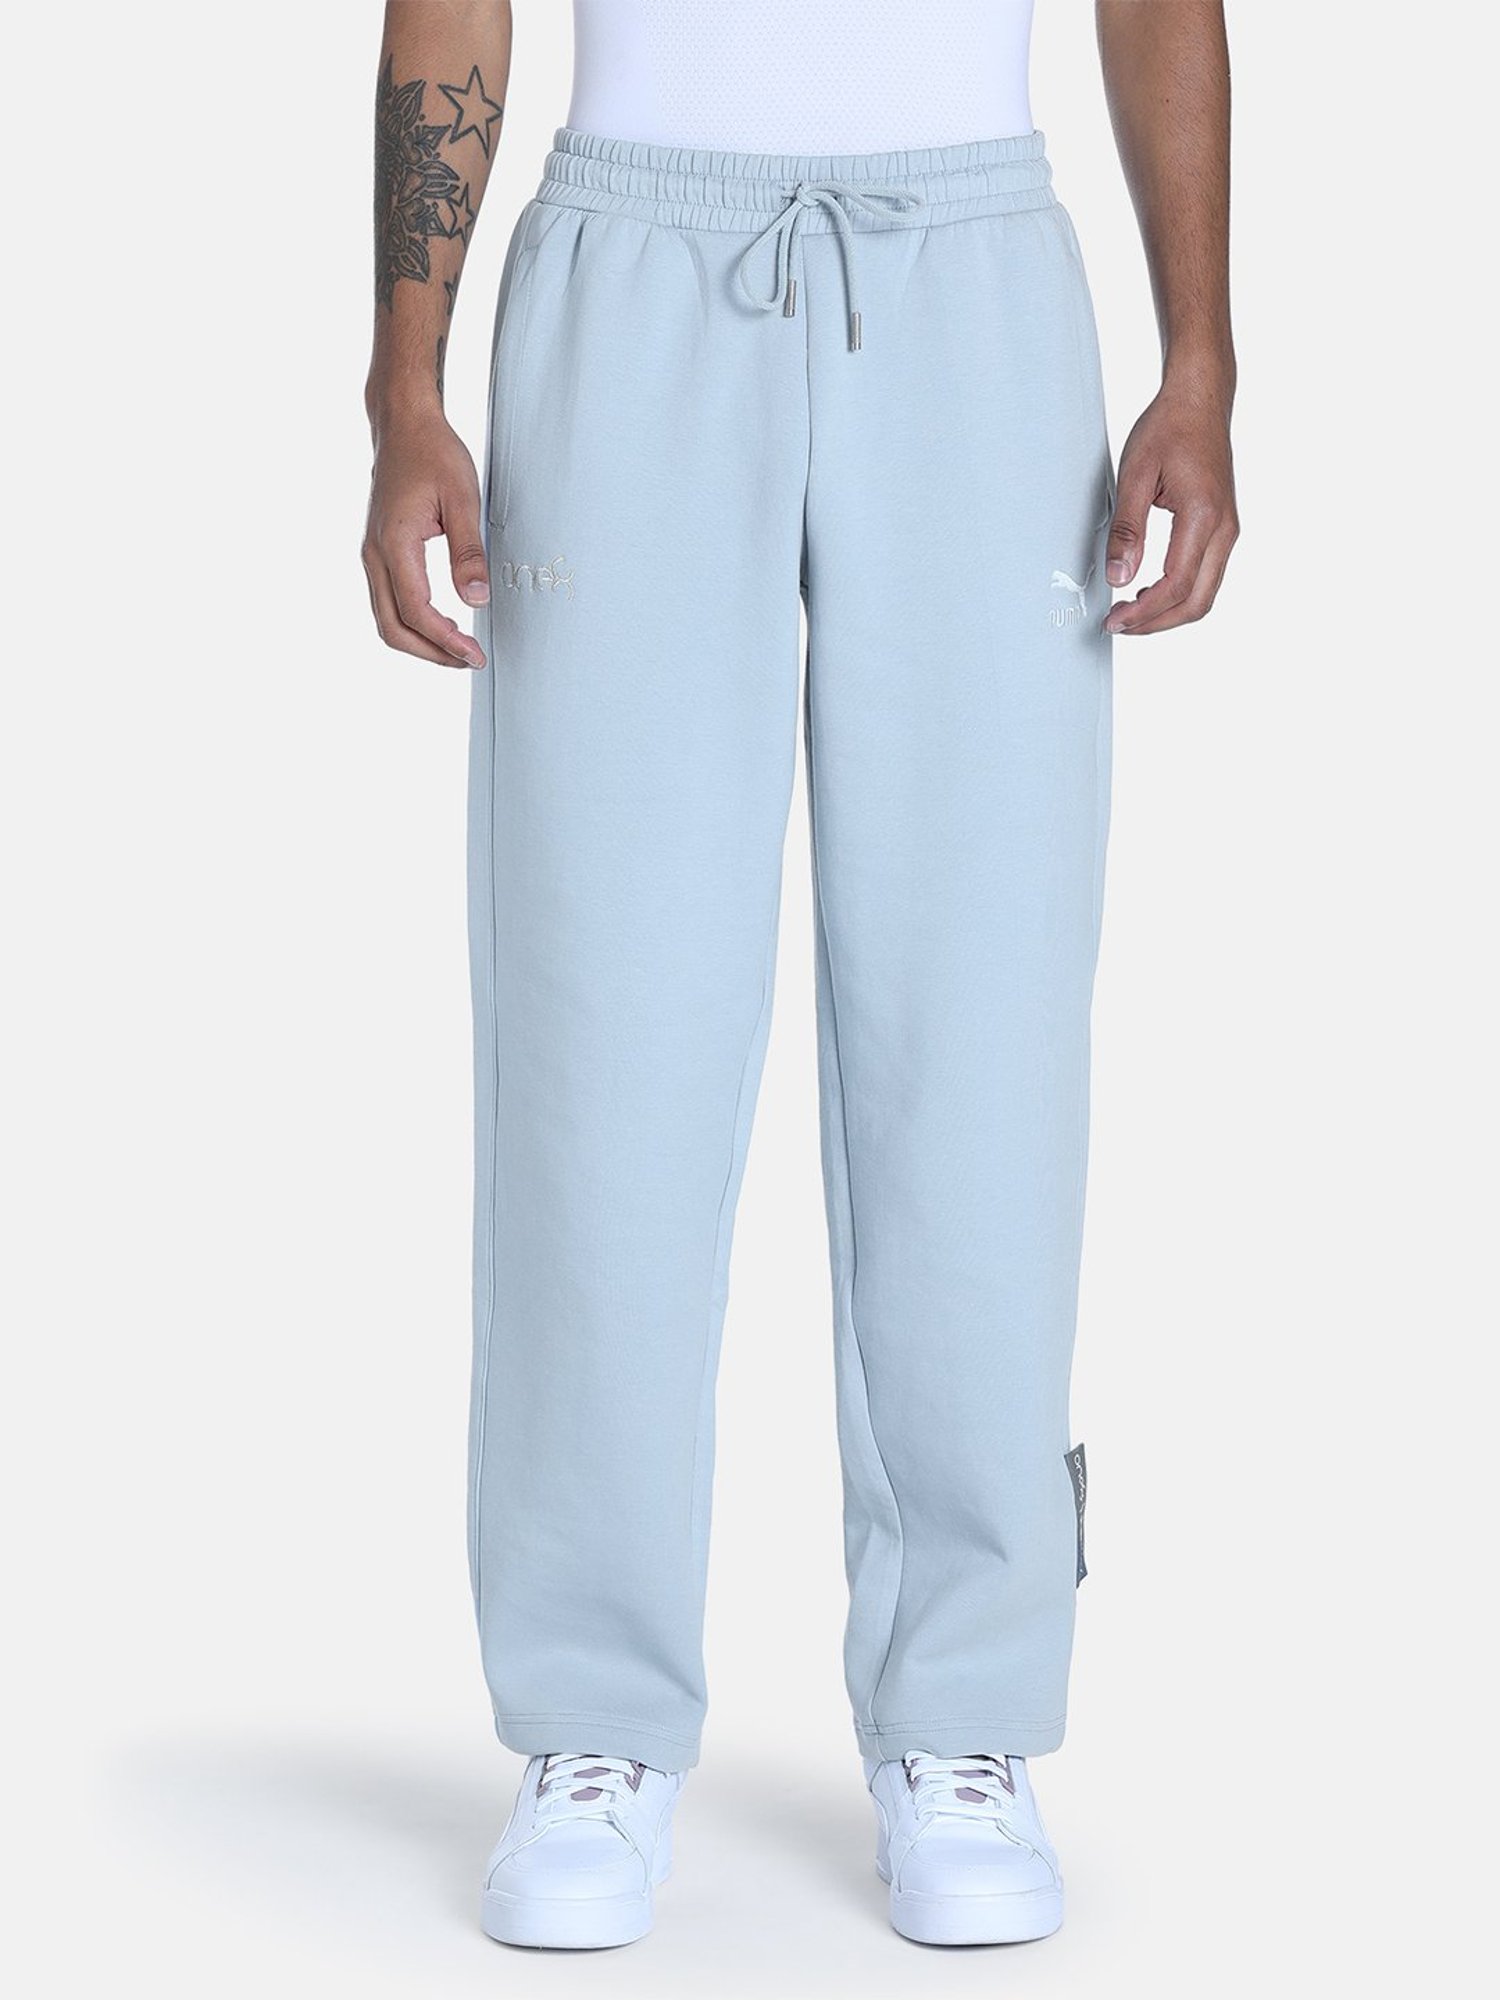 Nike Solid Men Blue Track Pants  Sports Station India